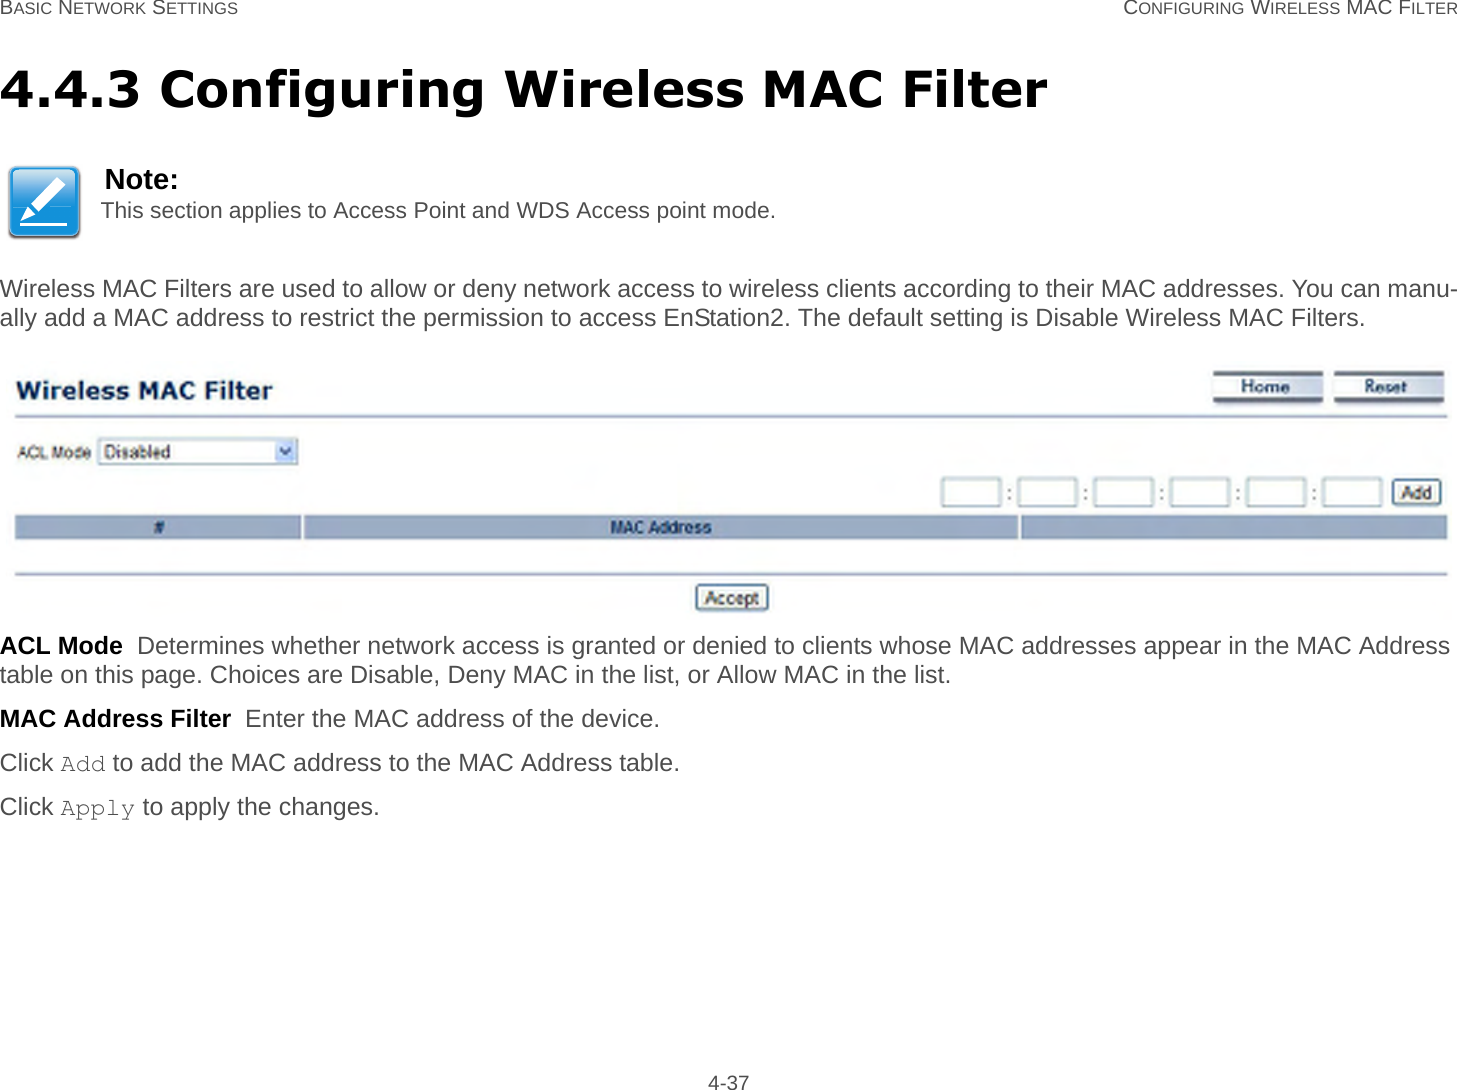 BASIC NETWORK SETTINGS CONFIGURING WIRELESS MAC FILTER 4-374.4.3 Configuring Wireless MAC FilterWireless MAC Filters are used to allow or deny network access to wireless clients according to their MAC addresses. You can manu-ally add a MAC address to restrict the permission to access EnStation2. The default setting is Disable Wireless MAC Filters.ACL Mode  Determines whether network access is granted or denied to clients whose MAC addresses appear in the MAC Address table on this page. Choices are Disable, Deny MAC in the list, or Allow MAC in the list.MAC Address Filter  Enter the MAC address of the device.Click Add to add the MAC address to the MAC Address table.Click Apply to apply the changes.Note:This section applies to Access Point and WDS Access point mode.